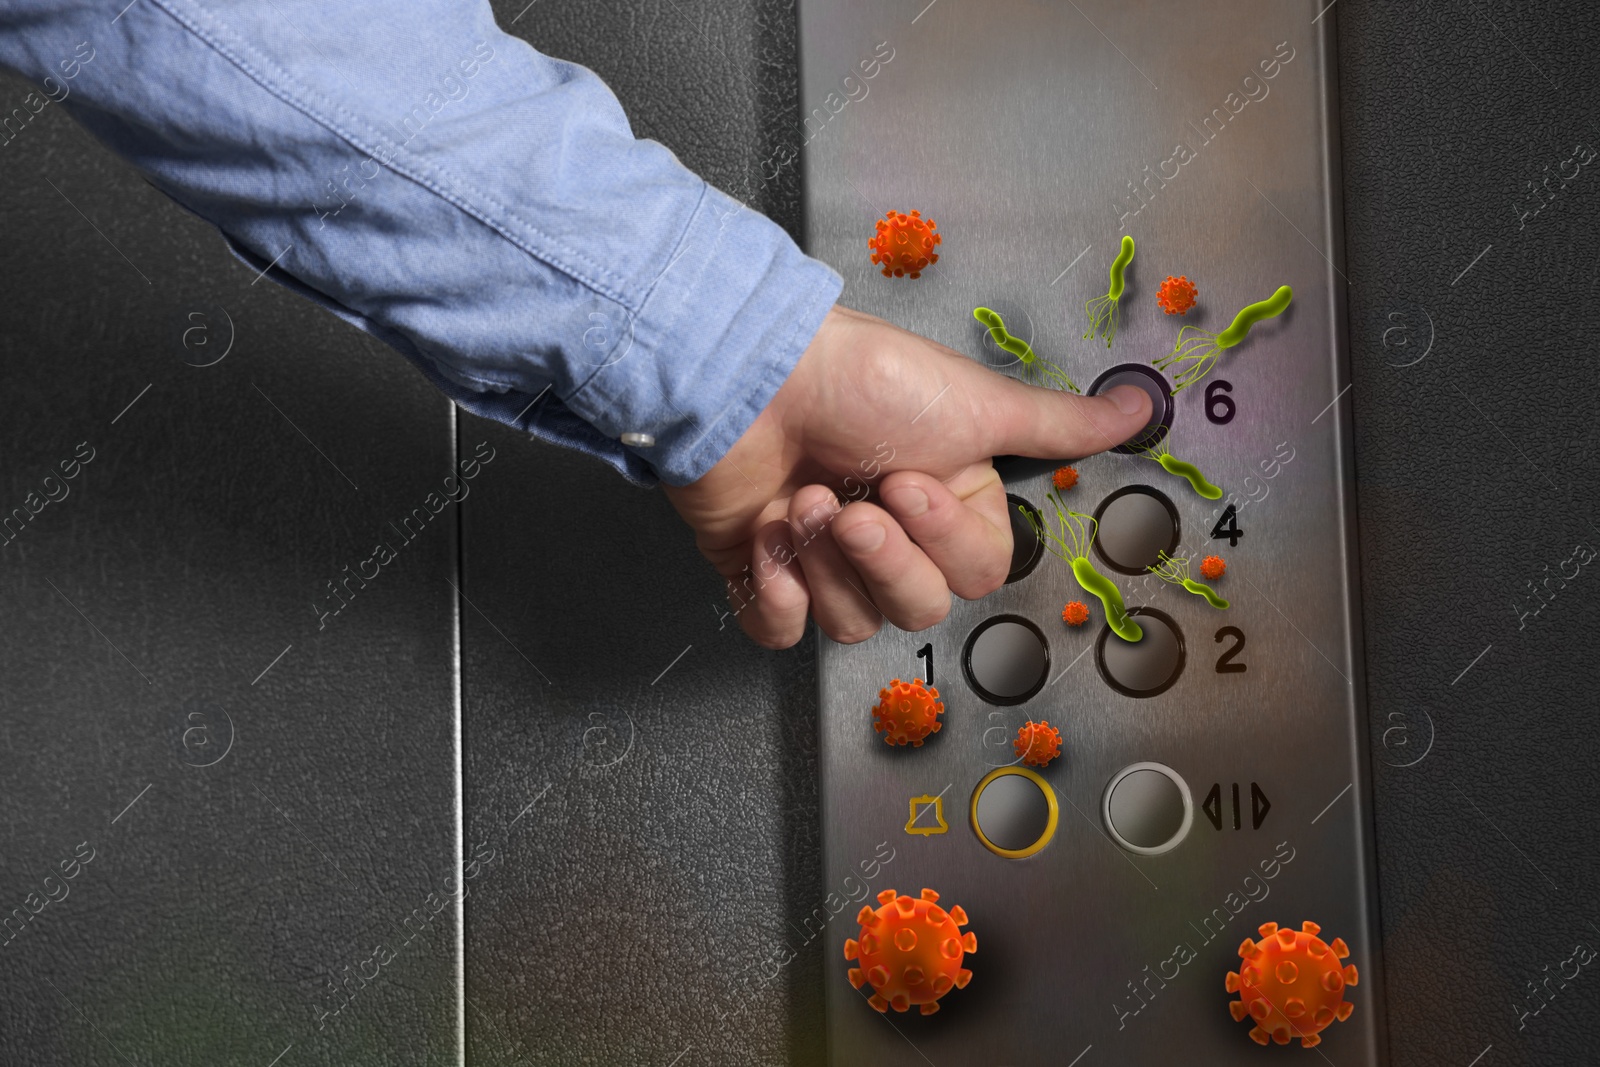 Image of Man press button in elevator with germs, closeup